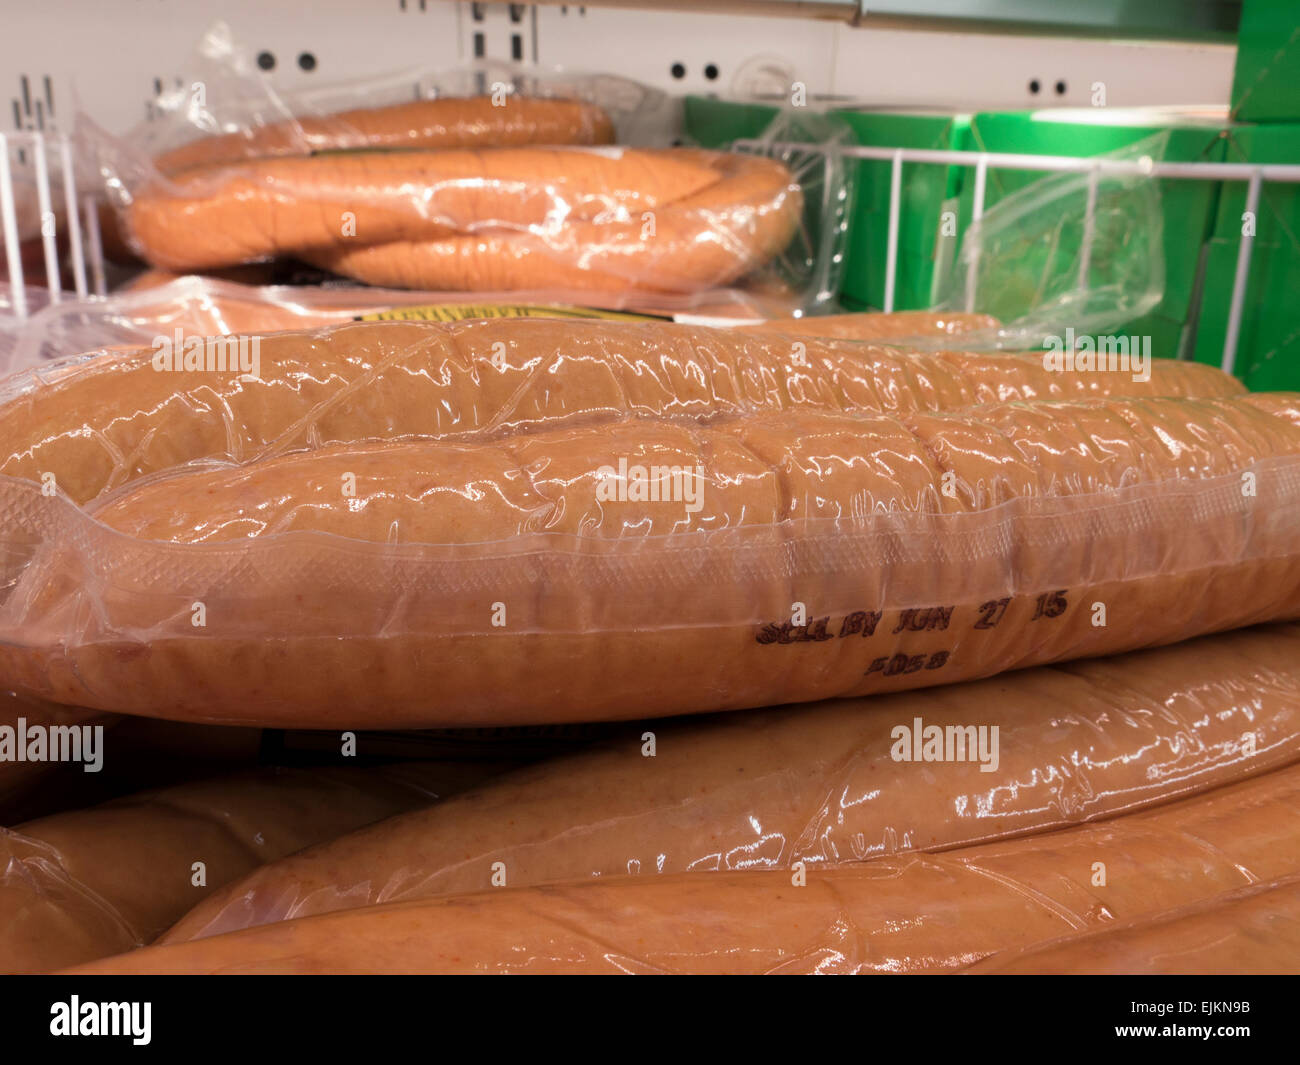 Kielbasa sausages are piled in the refrigerated meat section at the supermarket. Stock Photo